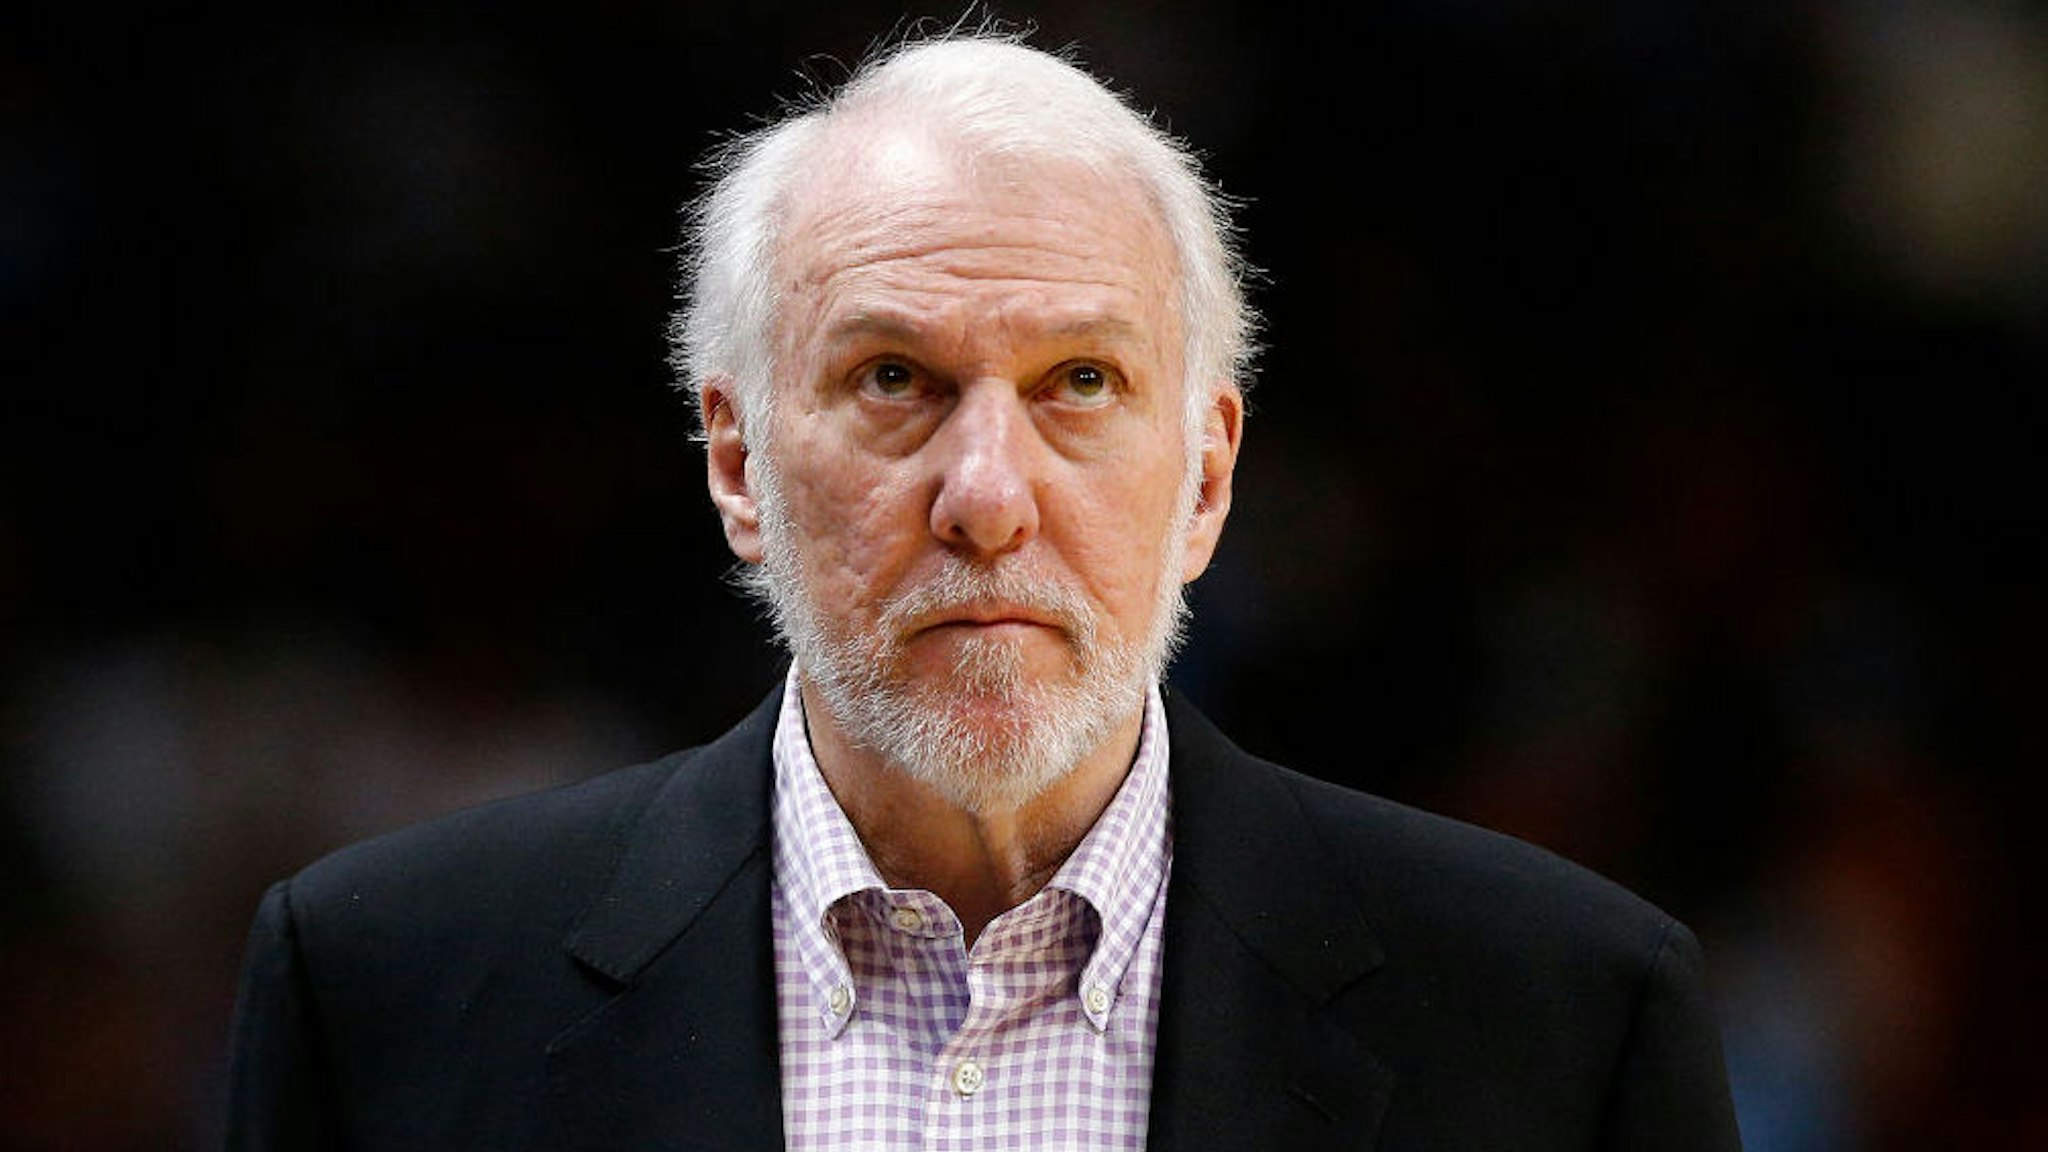 Head coach Gregg Popovich of the San Antonio Spurs looks on against the Miami Heat during the second half at American Airlines Arena on January 15, 2020 in Miami, Florida.